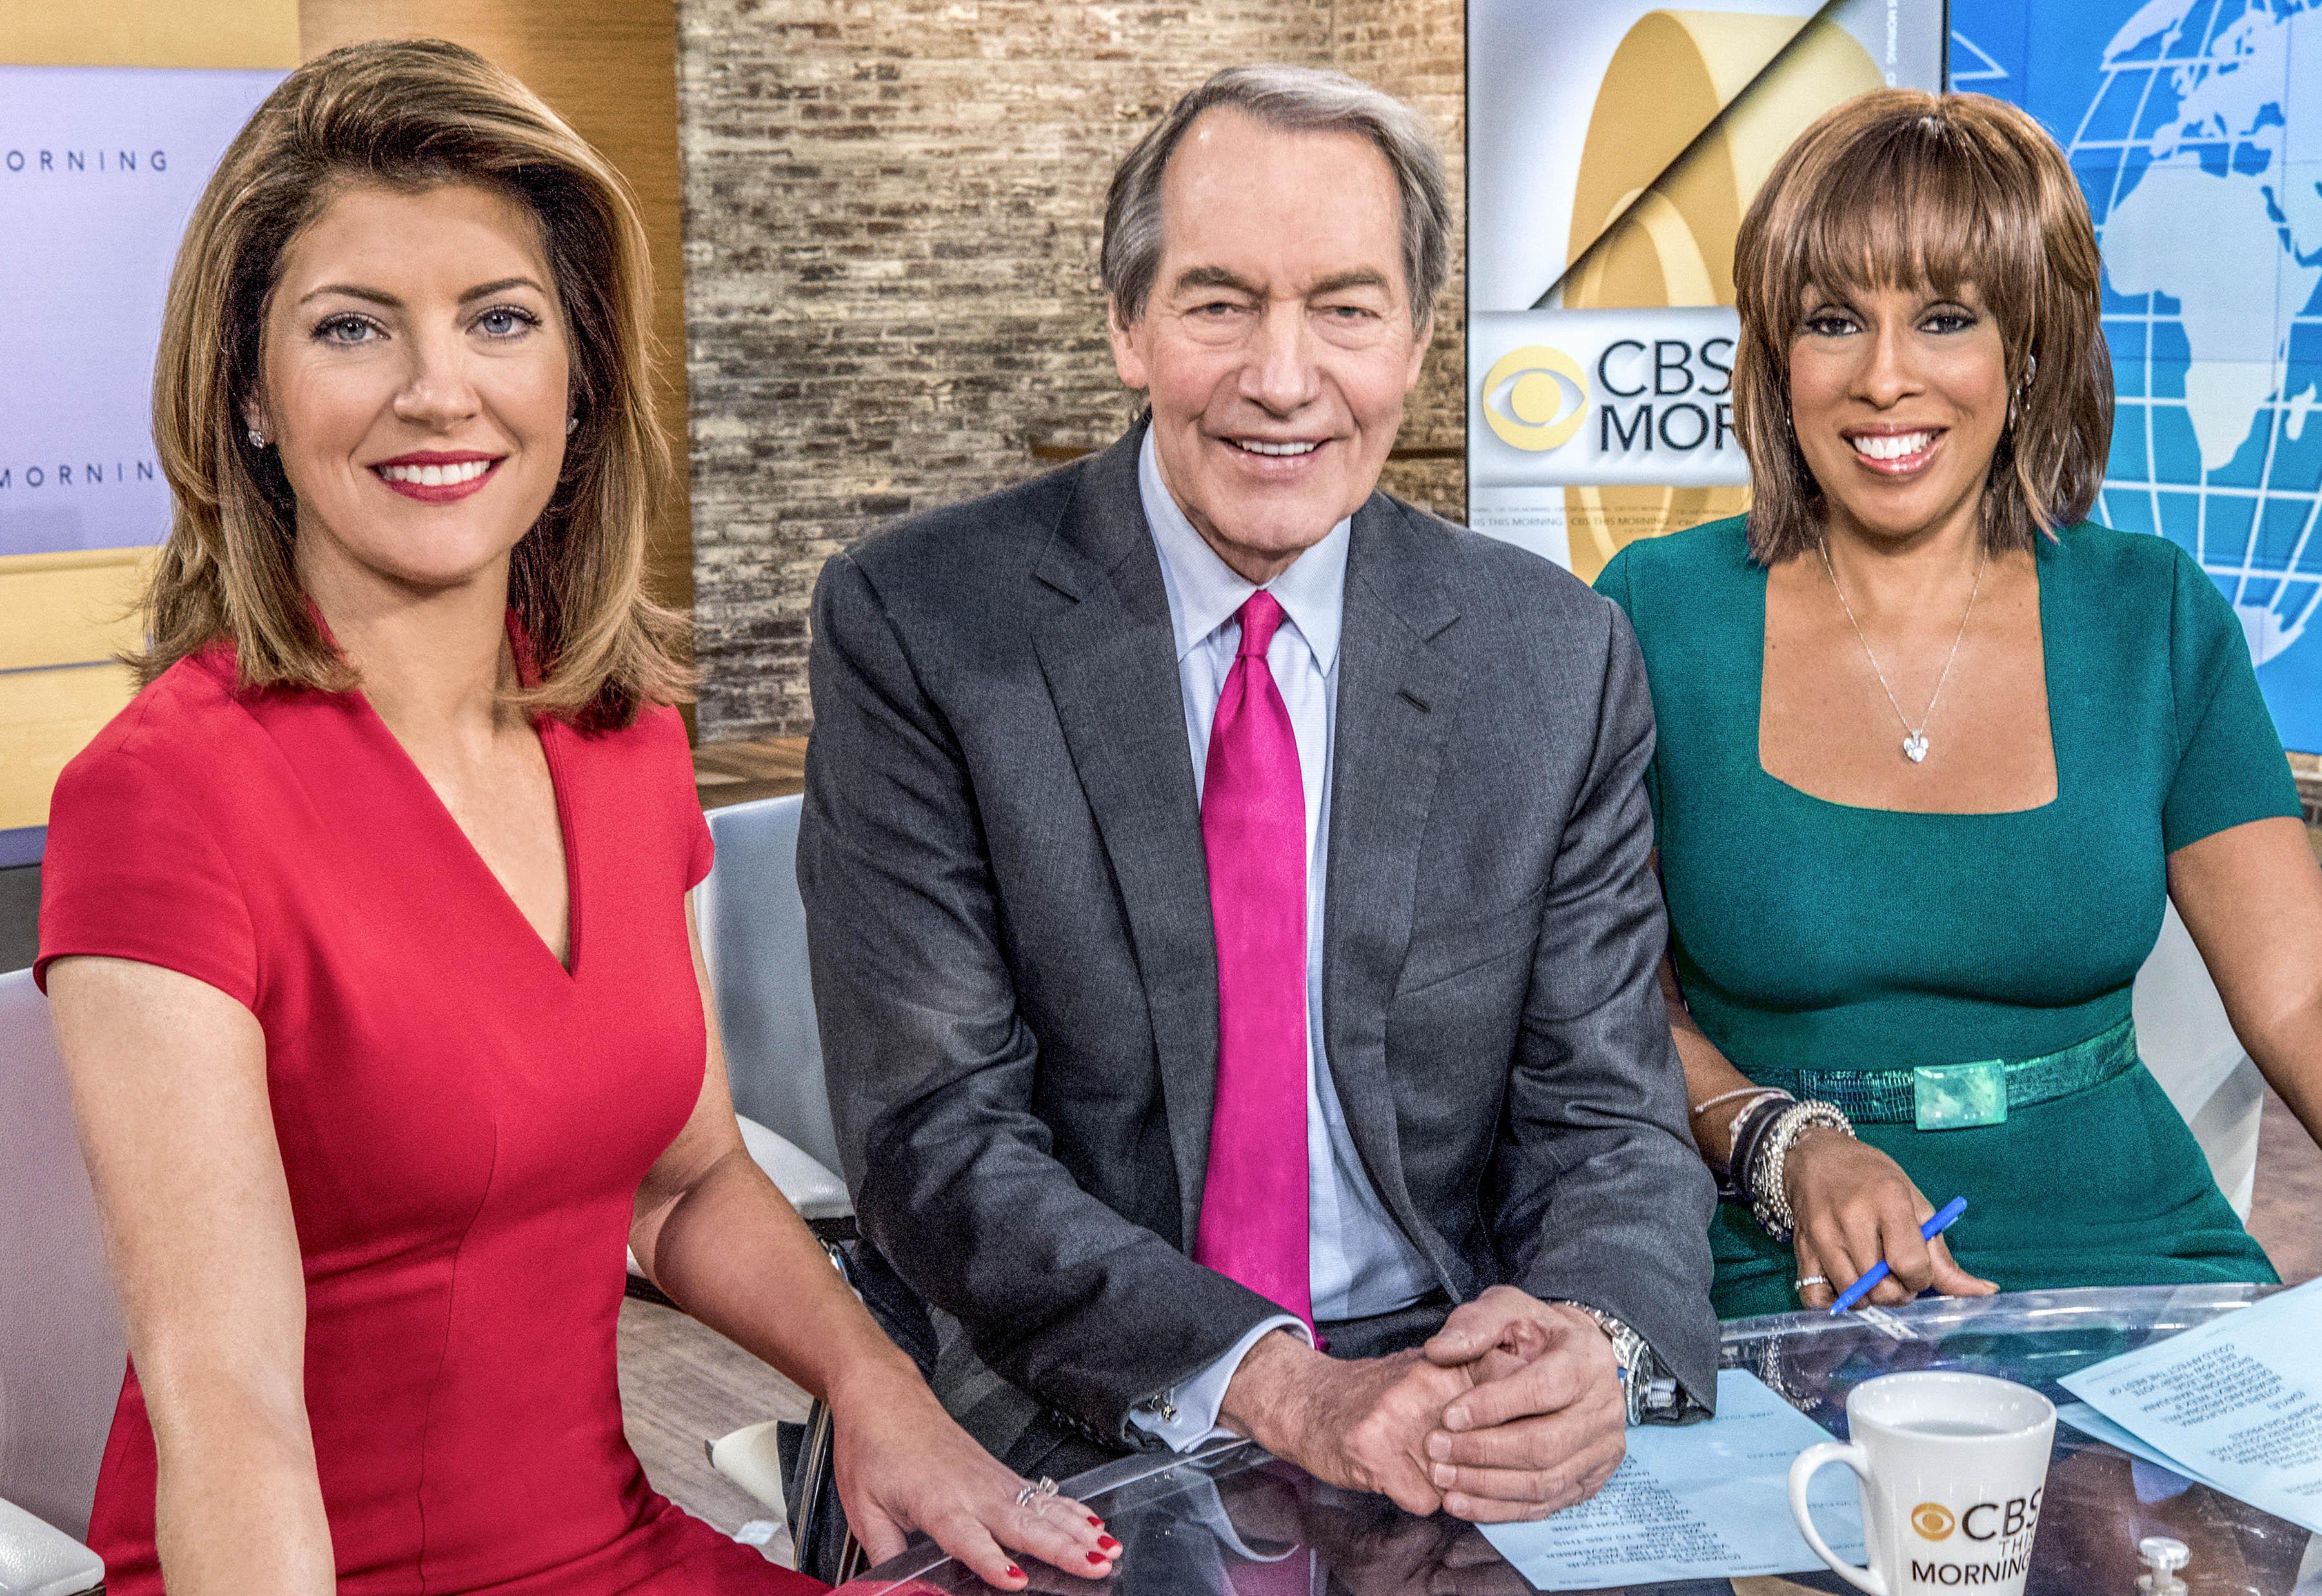 Viacomcbs Press Express “cbs This Morning” Is The Only Broadcast Morning News Program To Post